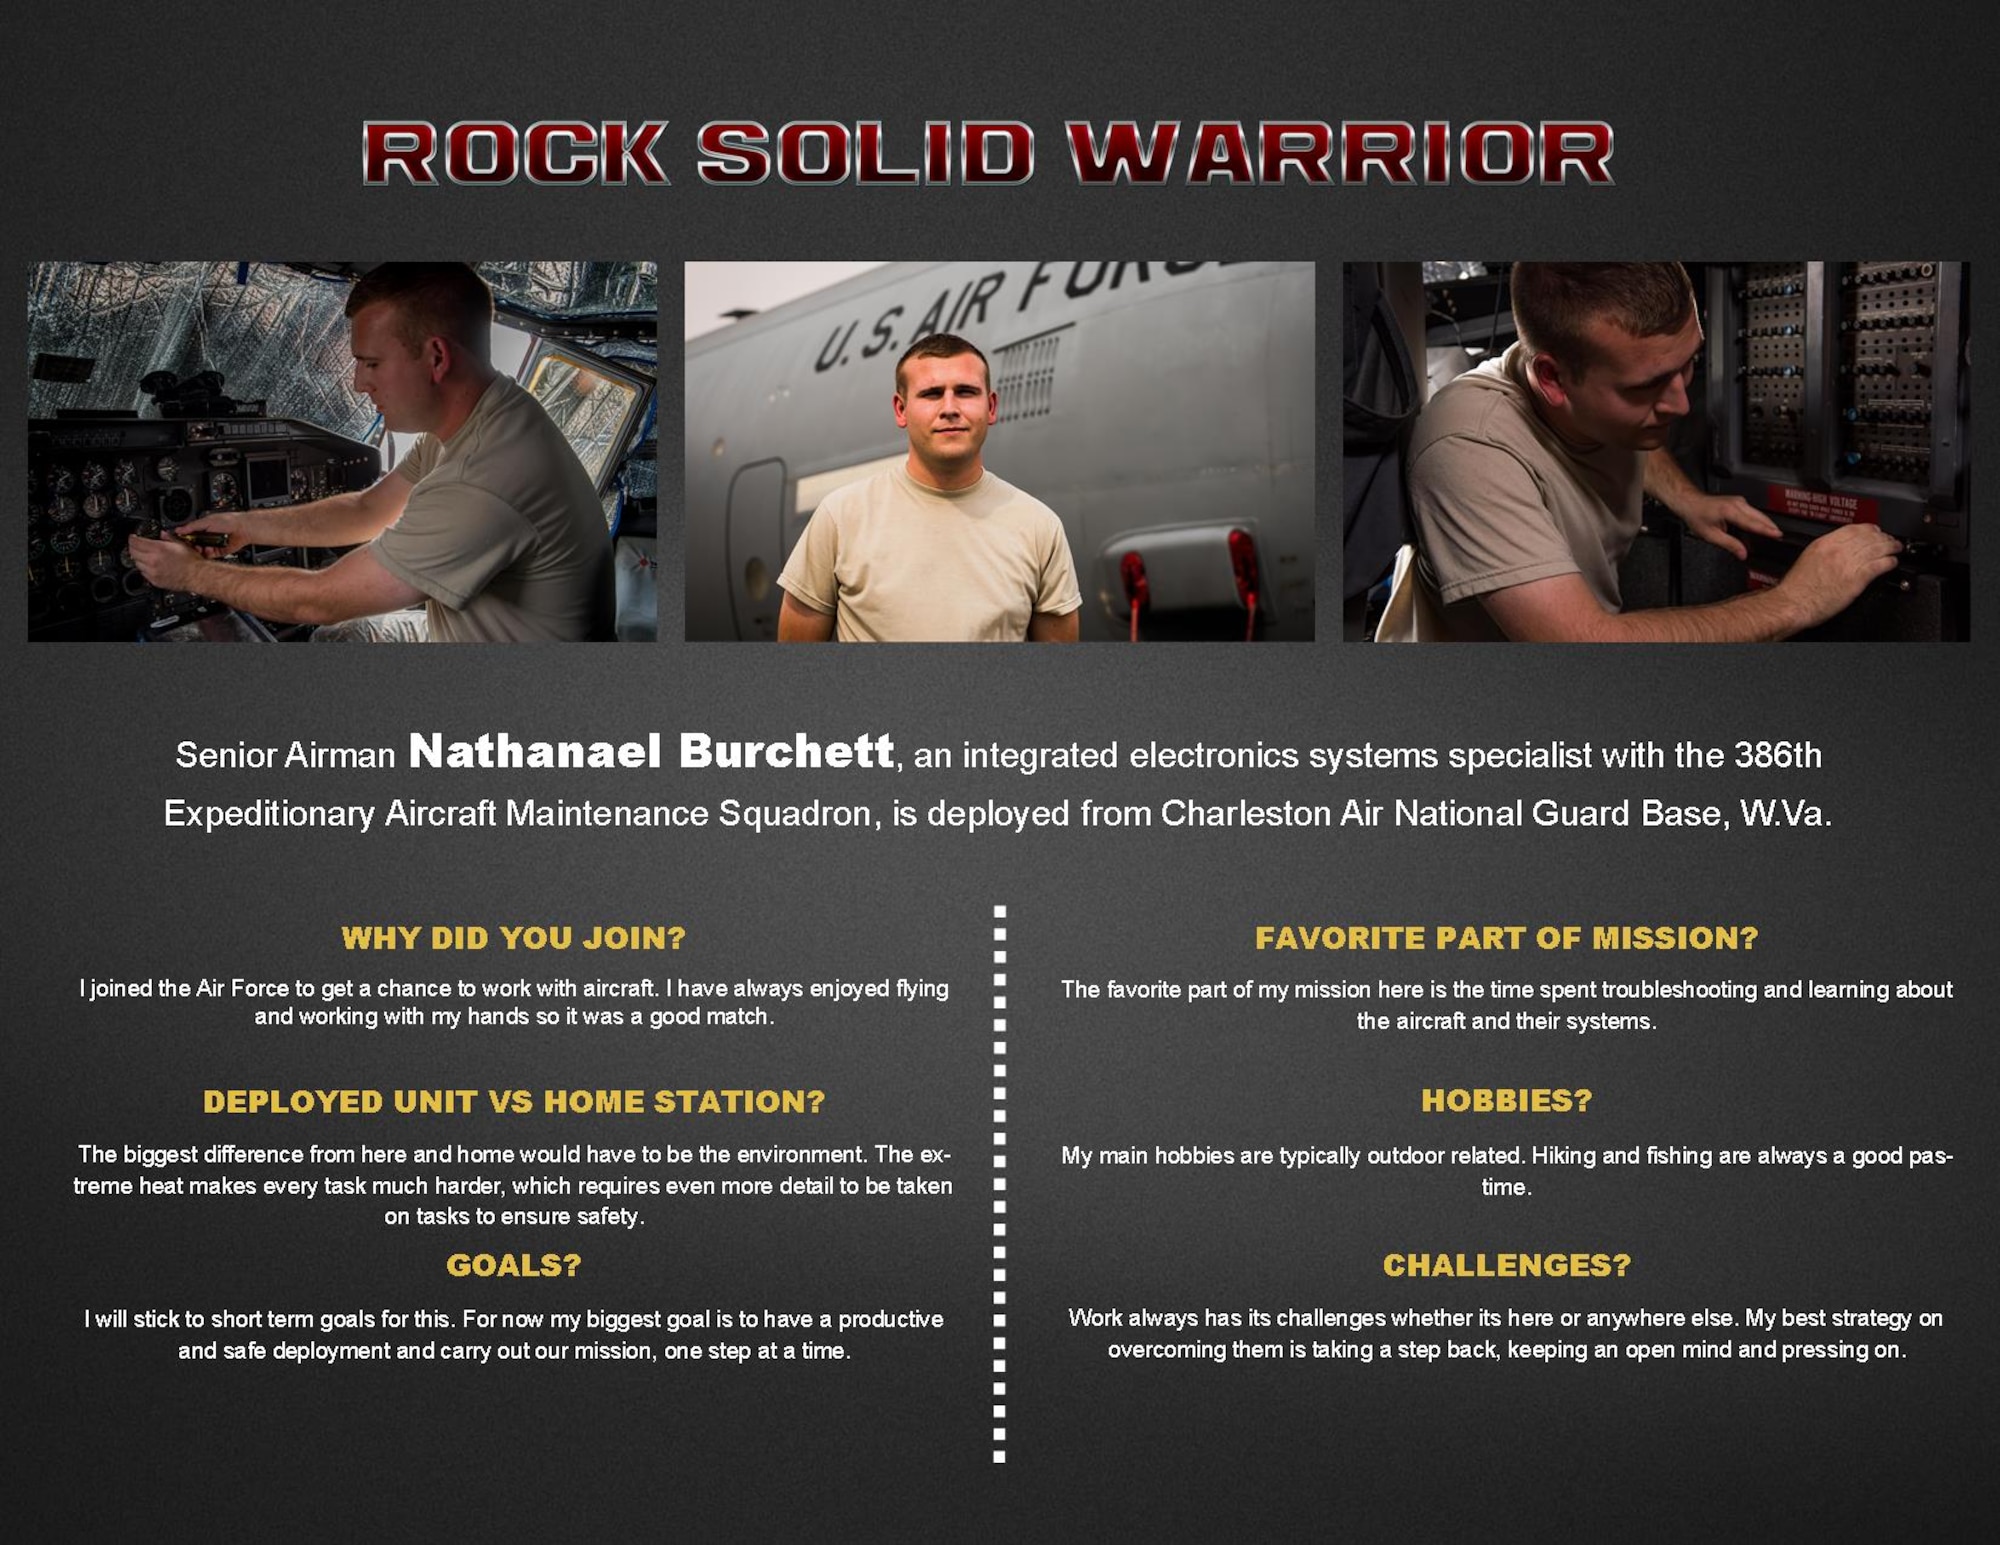 This week’s Rock Solid Warrior is Senior Airman Nathanael Burchett, an integrated electronics systems specialist with the 386th Expeditionary Aircraft Maintenance Squadron, deployed from Charleston Air National Guard Base, W.Va. The Rock Solid Warrior program is a way to recognize and spotlight the Airmen of the 386th Air Expeditionary Wing for their positive impact and commitment to the mission.